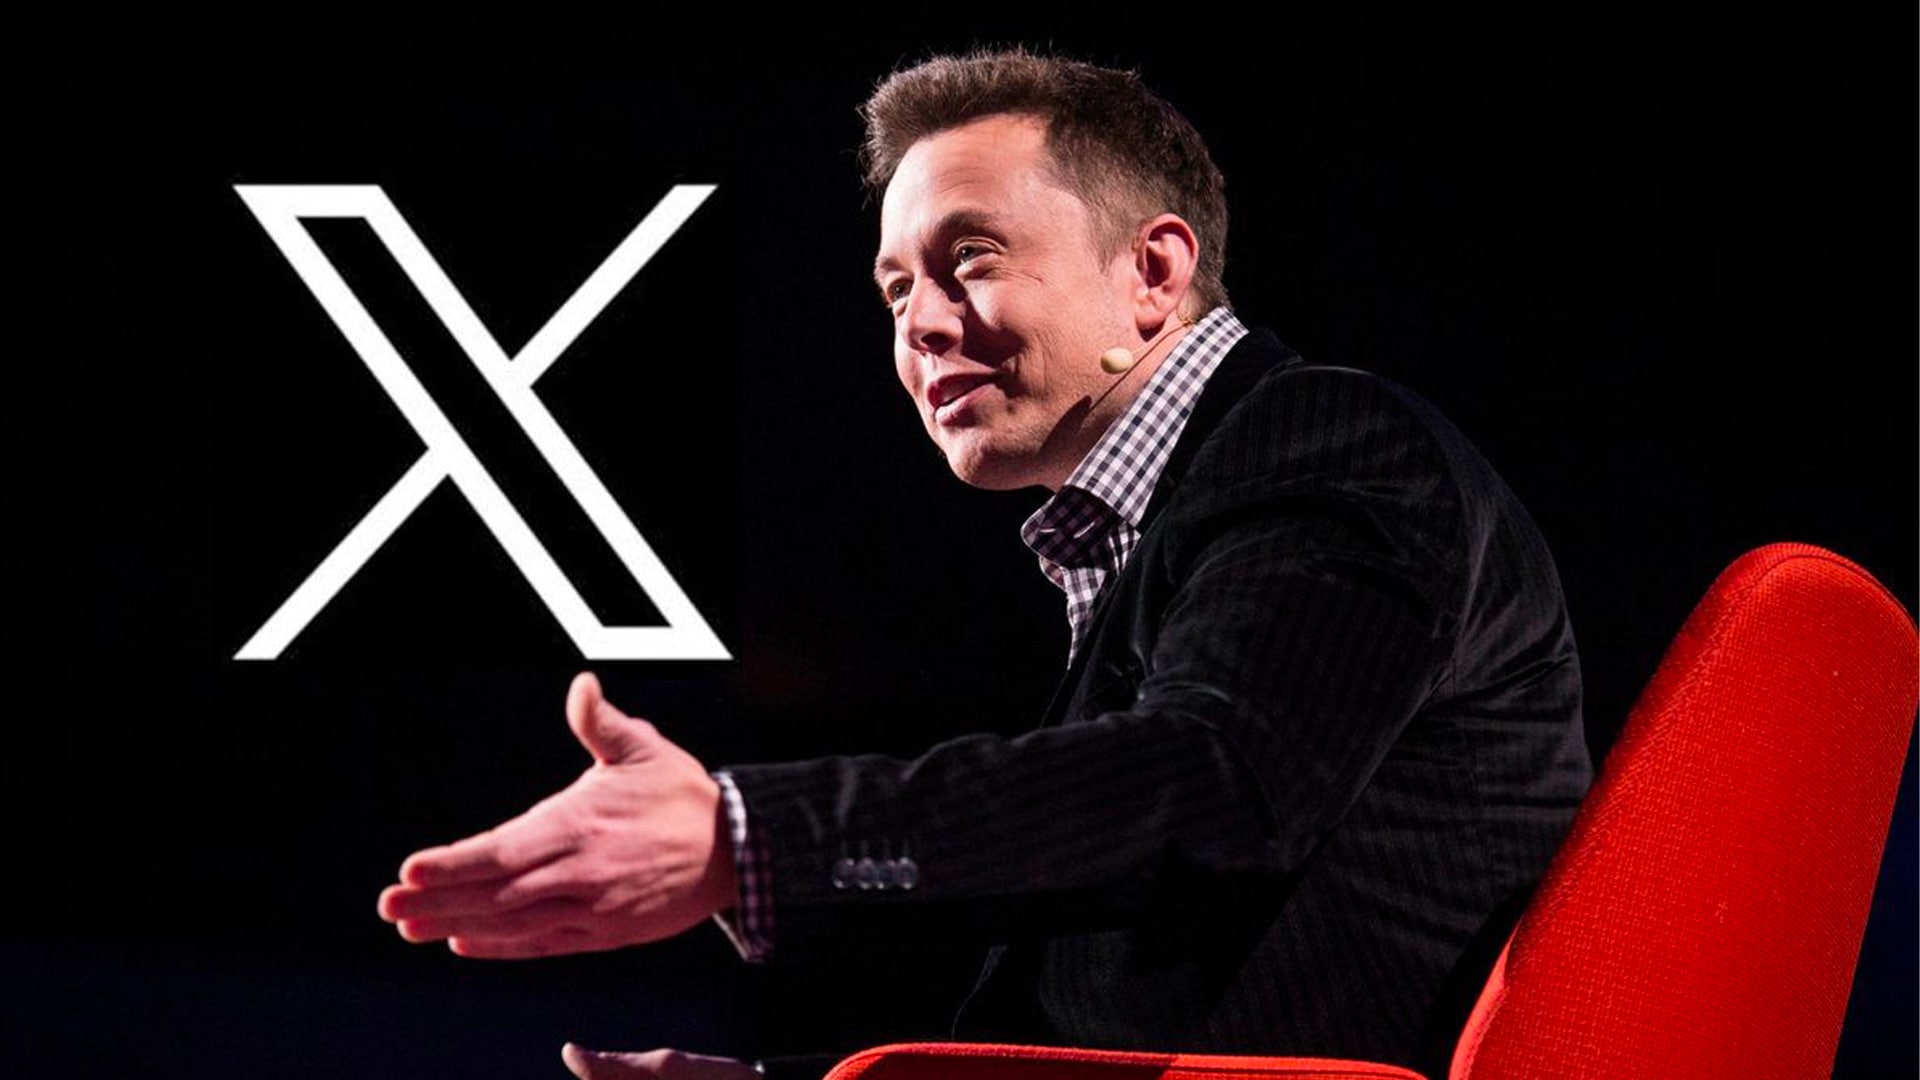 New Ten Calls Xxx Video - Elon Musk's X officially rolling out audio, video calls, one step closer to  becoming 'the everything app'